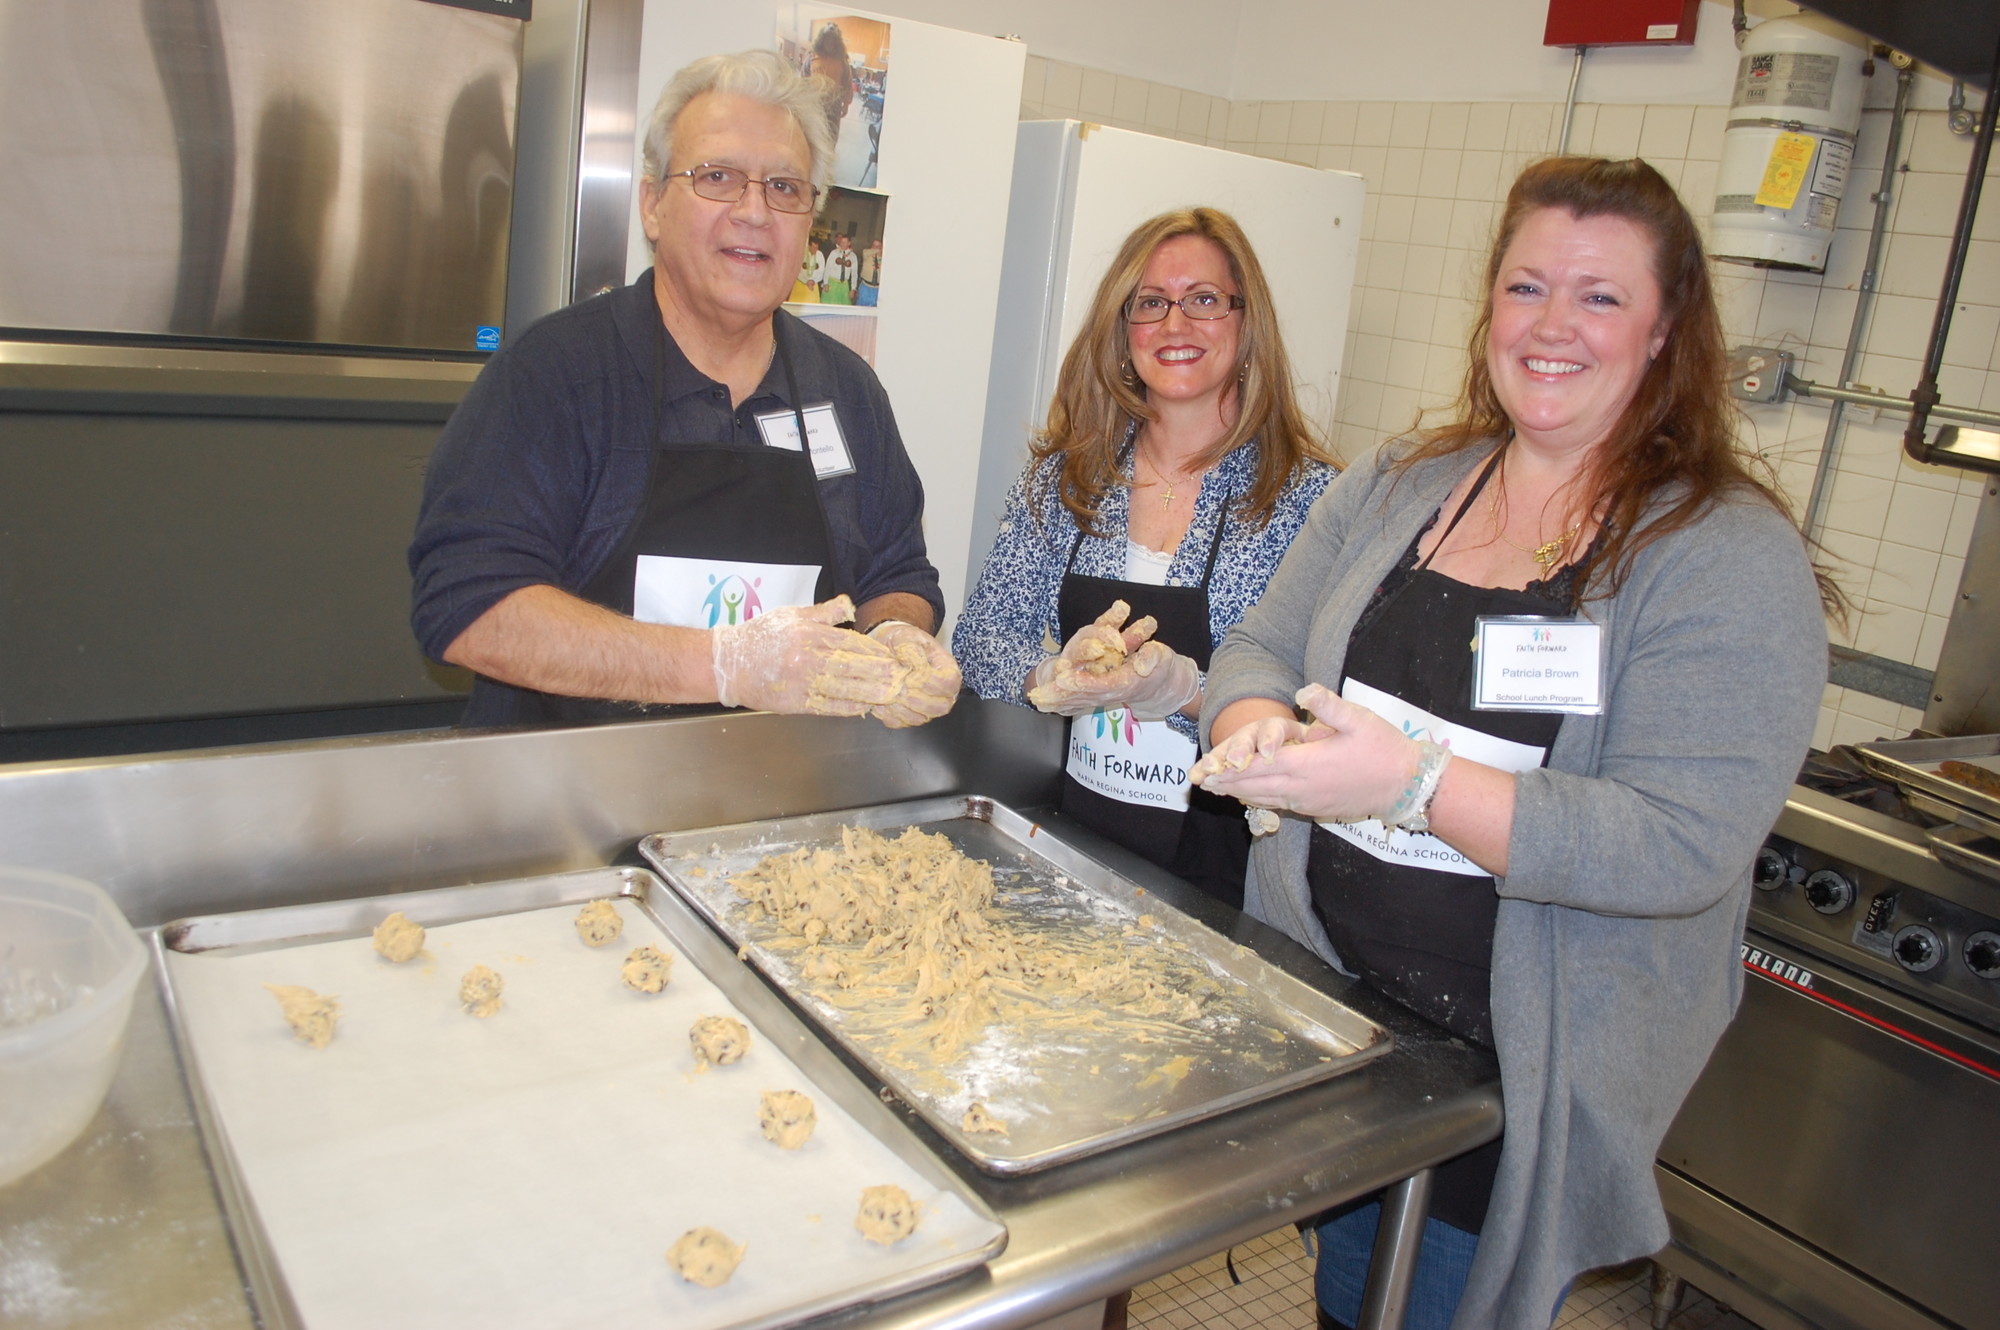 Vincent Mondello, Pattie Migliore and Patricia Brown baked fresh cookies for guests.